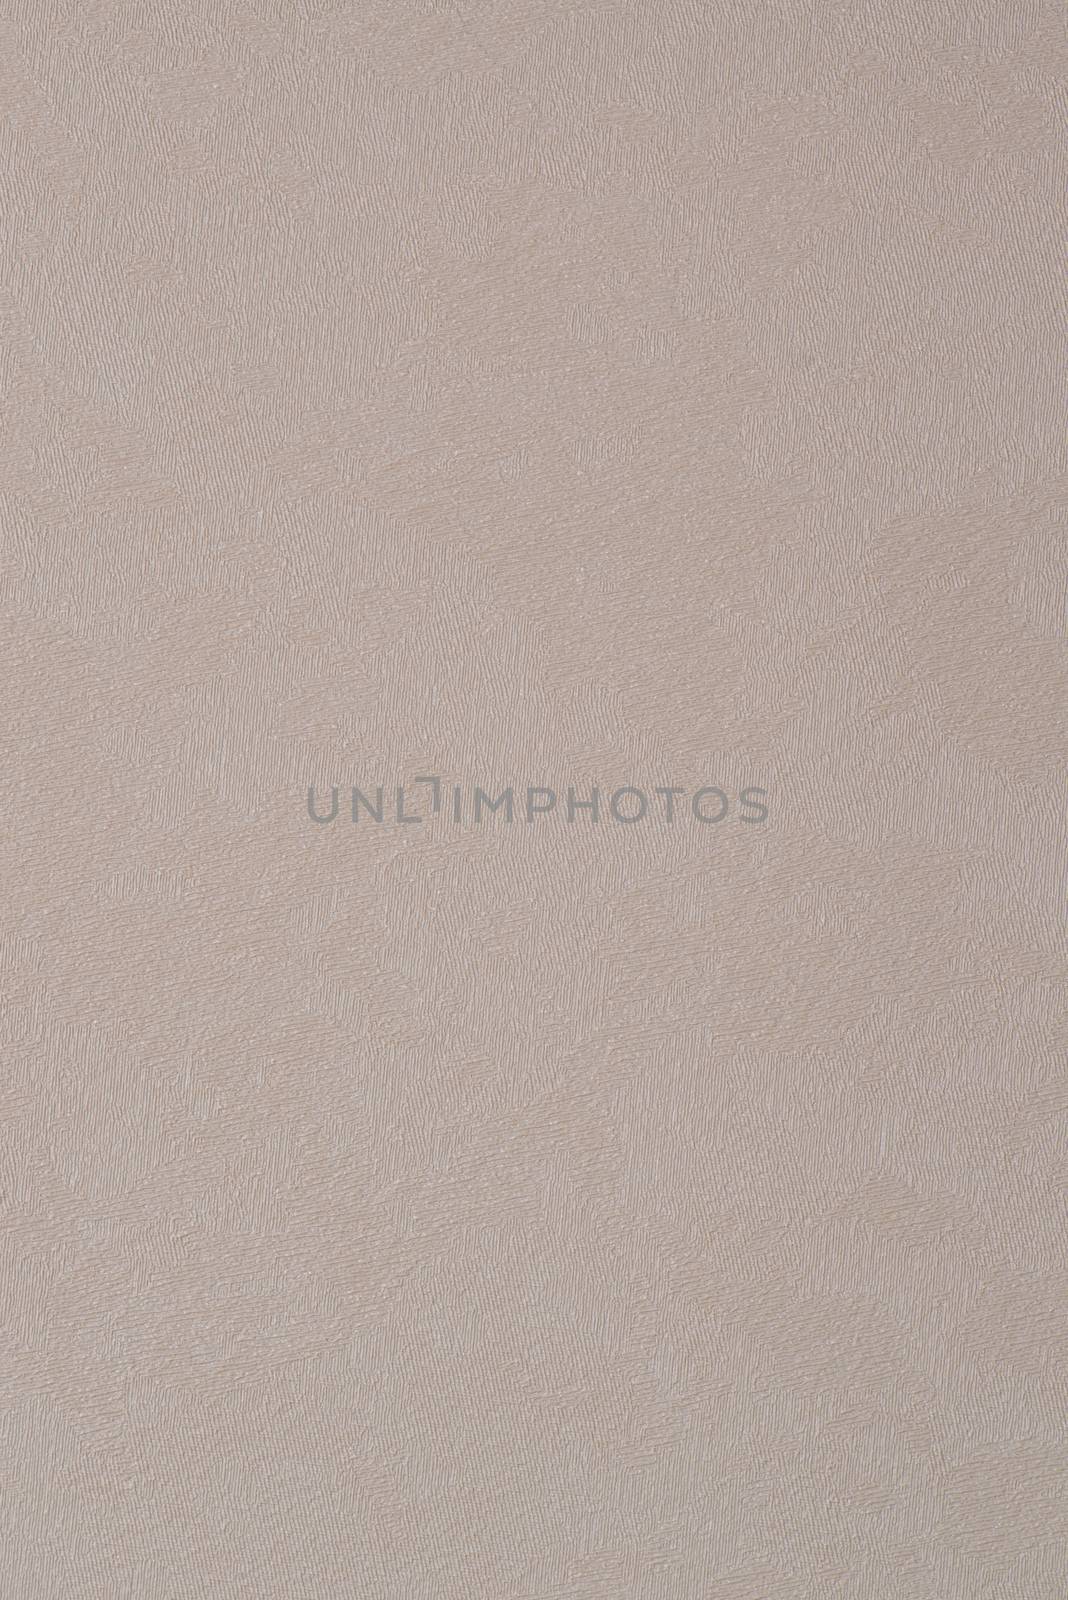 Beige wallpaper embossed texture for background.